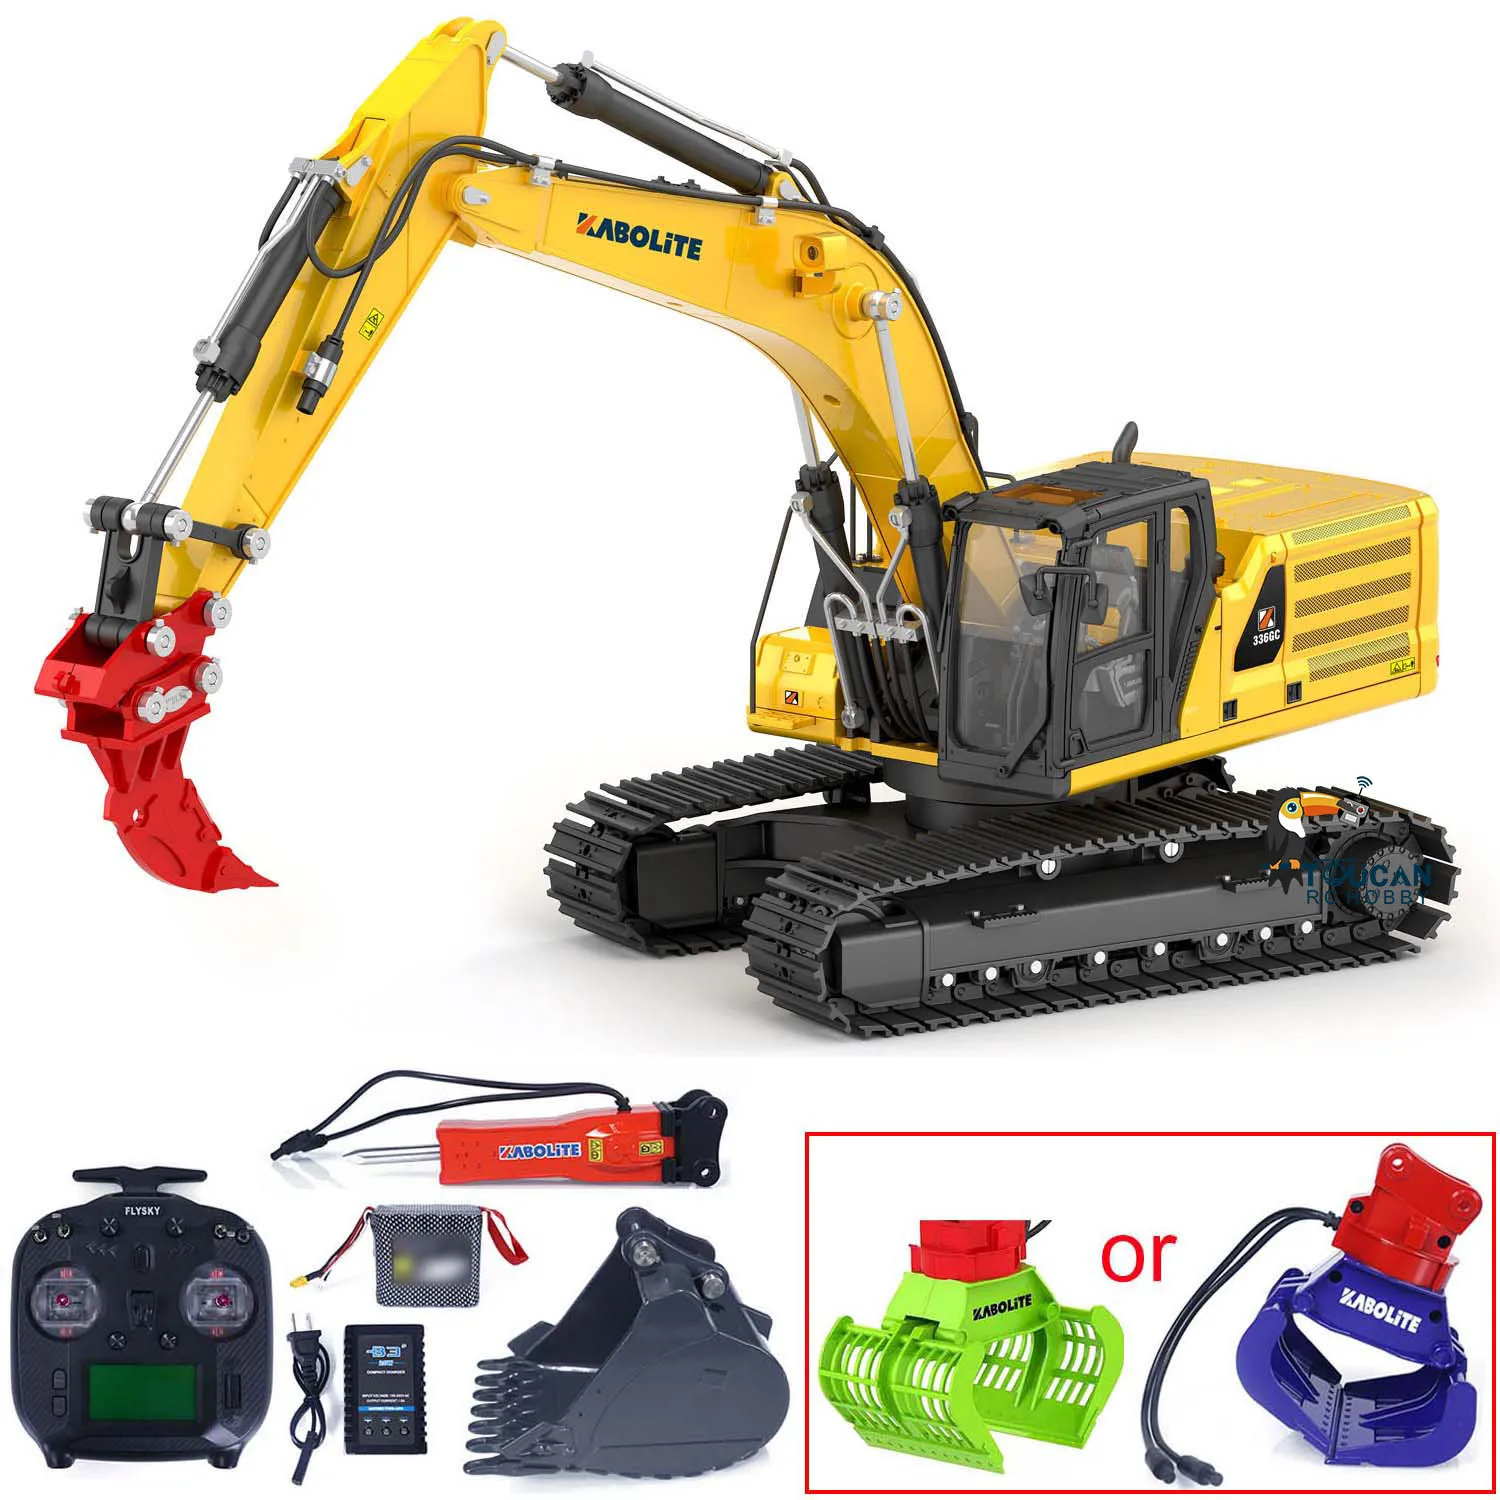 

Kabolite K336GC RC Hydraulic Excavator RTR 1/18 Remote Control K961 100S Construction Digger Light Model RC Toy TH22749